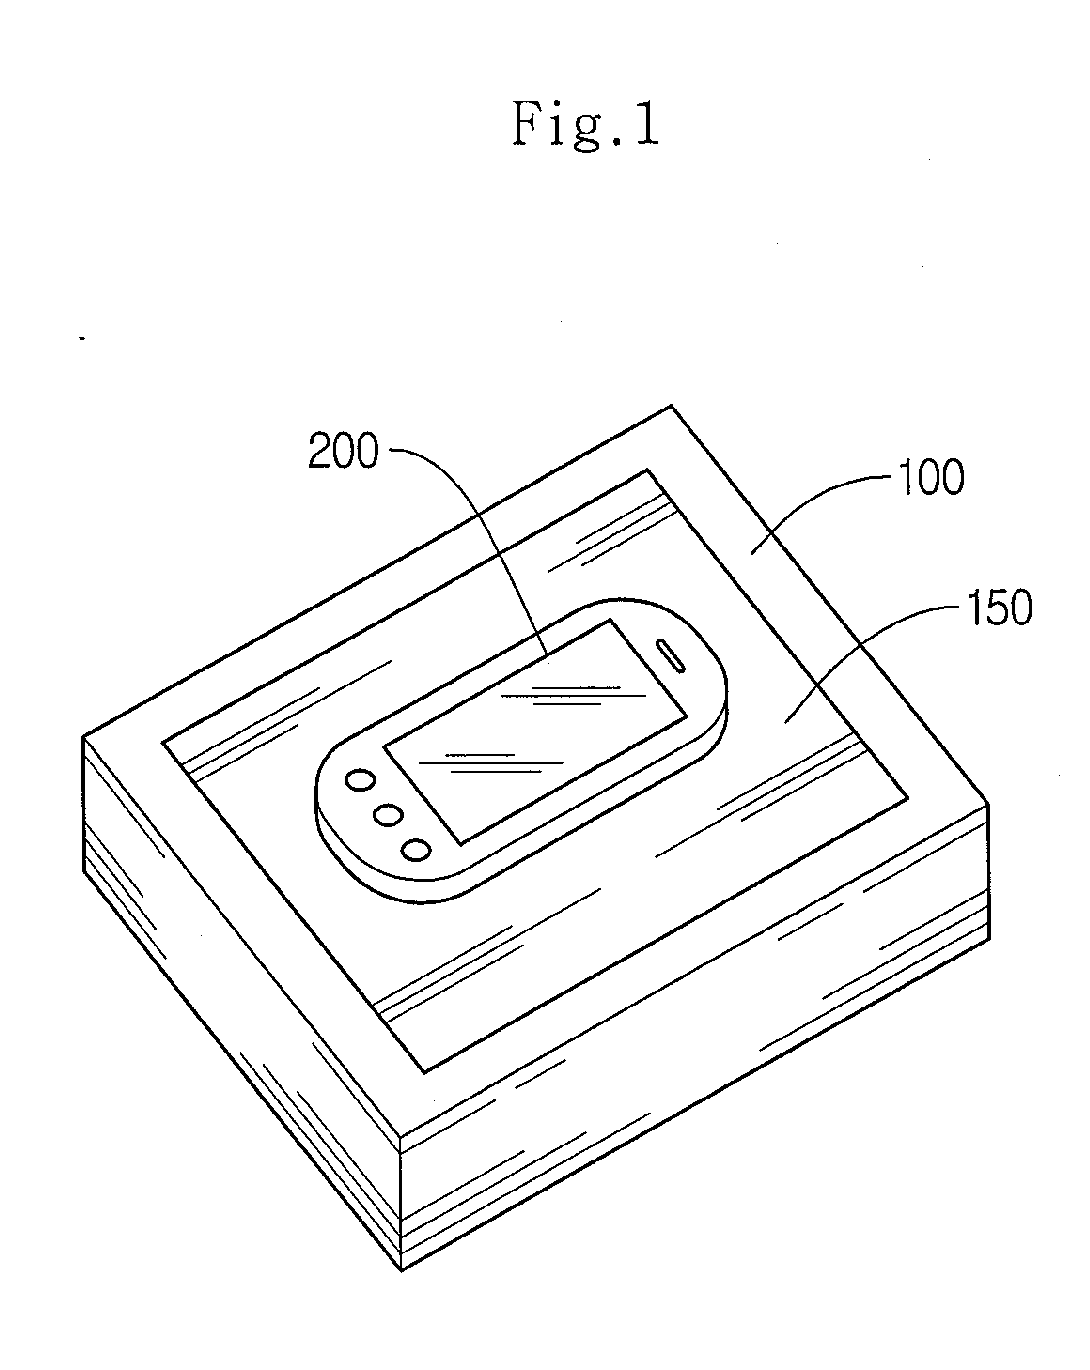 Device, system, and method for inductive charging